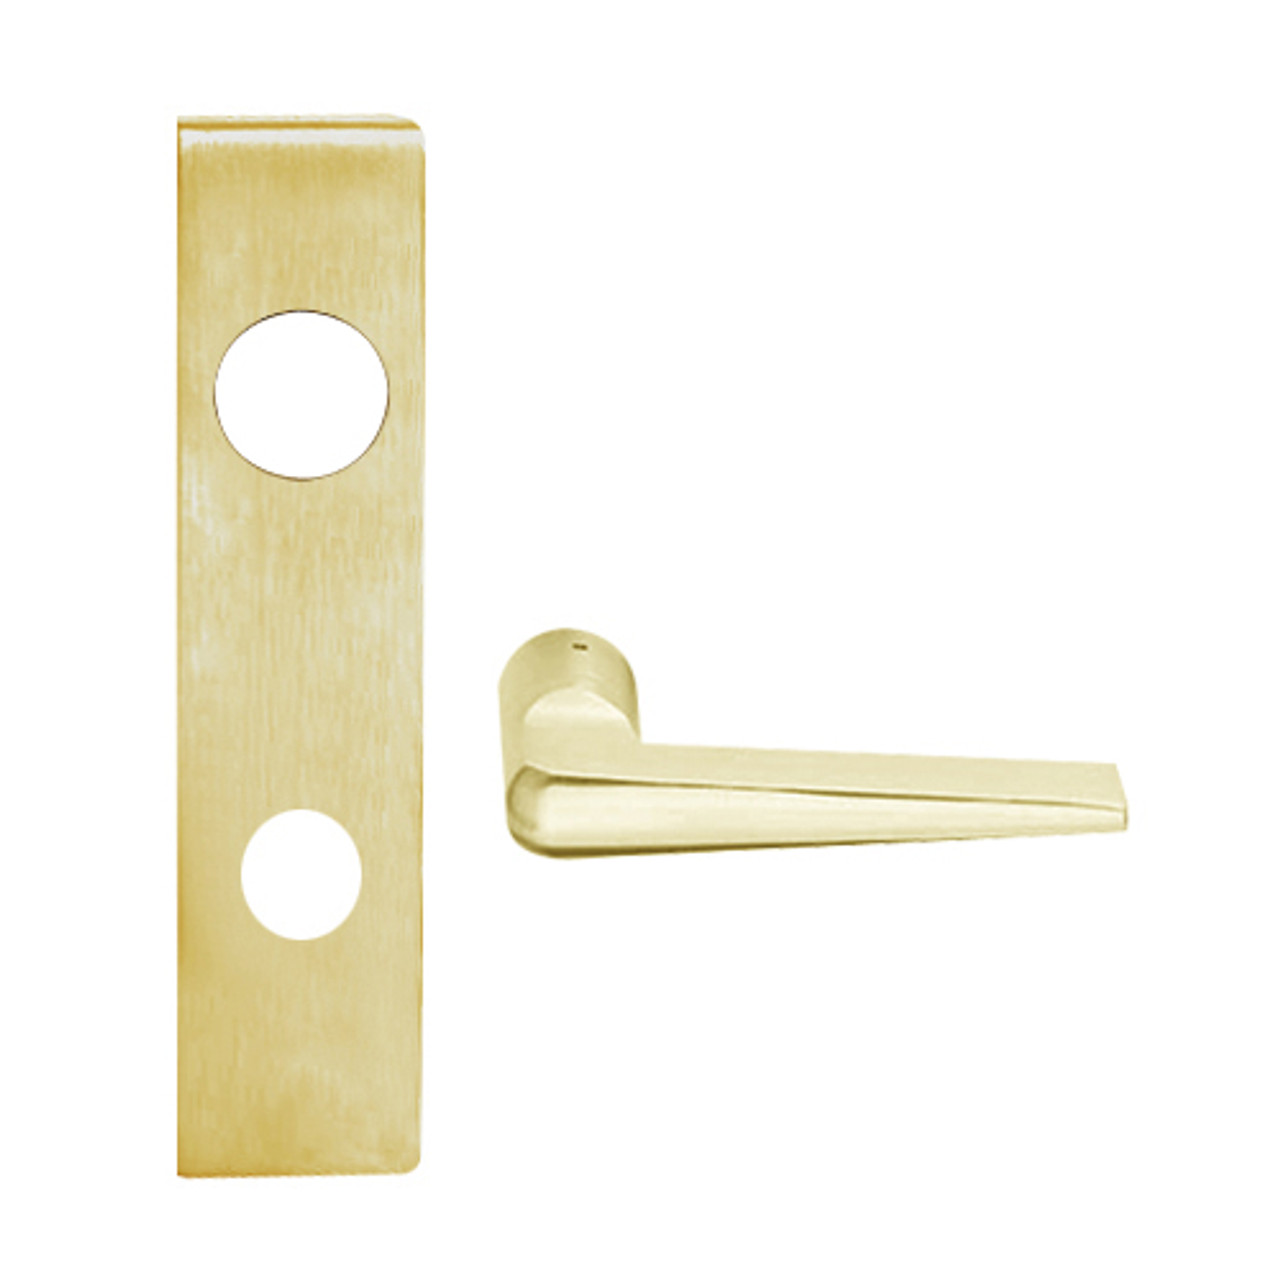 L9026J-05L-606 Schlage L Series Exit Lock with Cylinder Commercial Mortise Lock with 05 Cast Lever Design Prepped for FSIC in Satin Brass